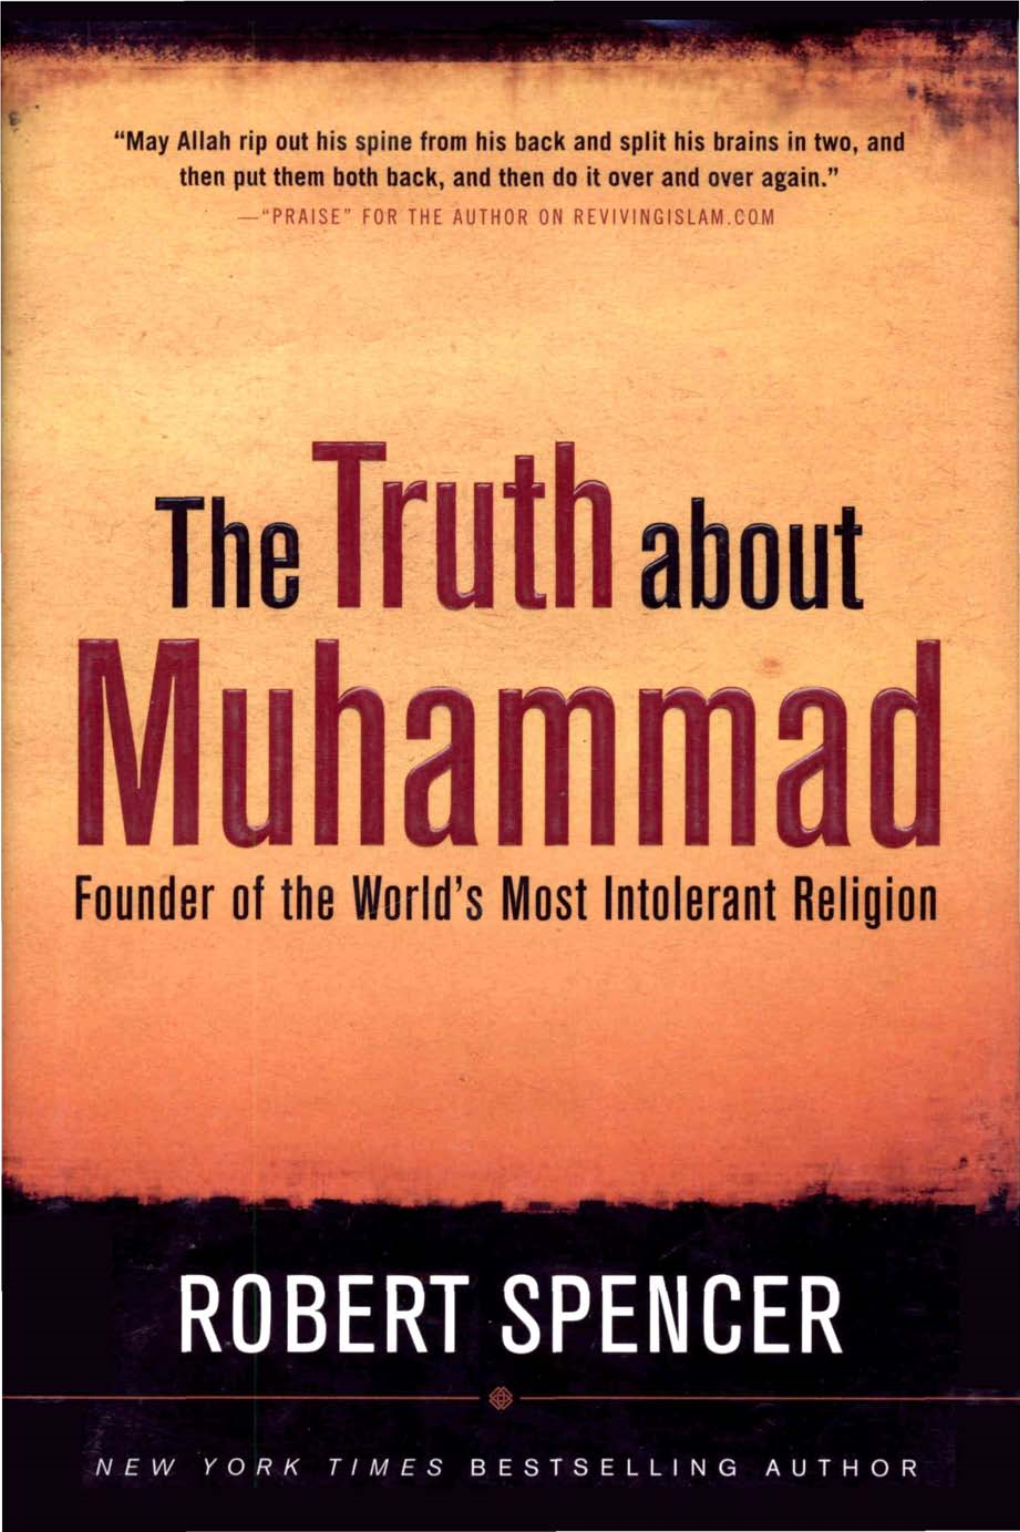 The Truth About Muhammad Argues That, for Fourteen Hundred Years, the 'Words and Deeds of Muhammad Have Been Moving Muslims to Commit Acts of Violence.'"